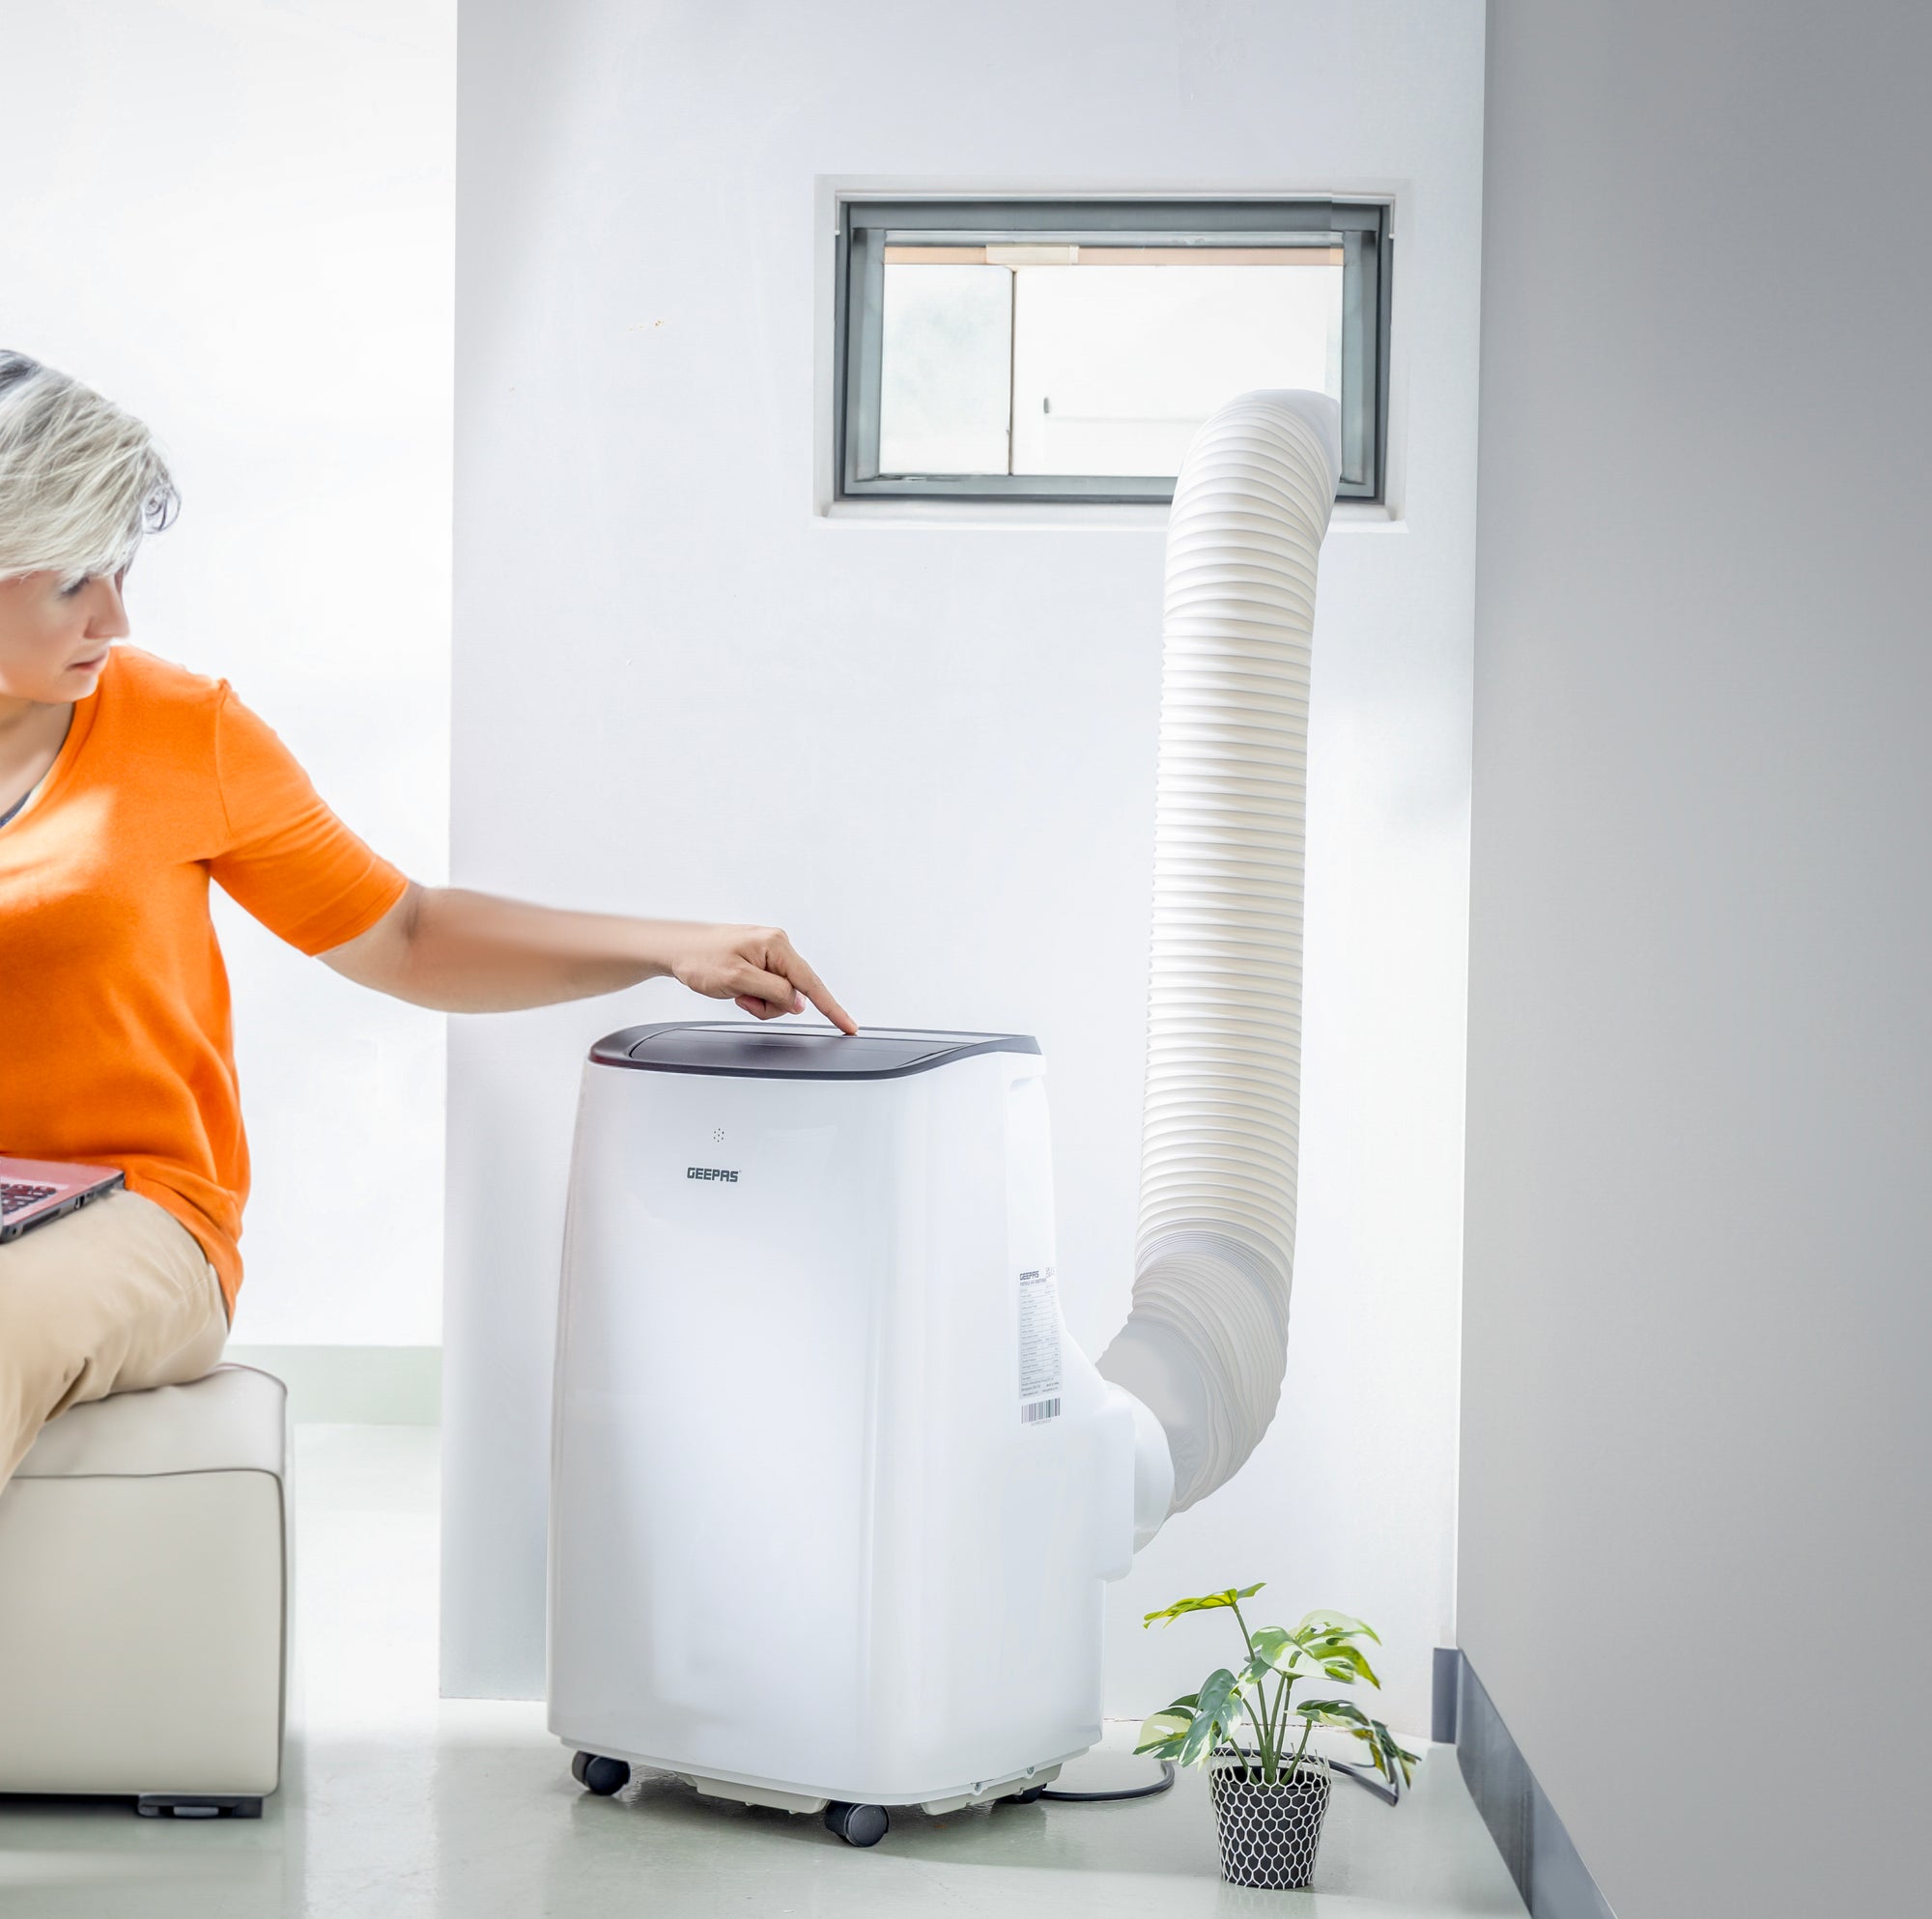 What Are The Benefits Of Portable Air Conditioning?